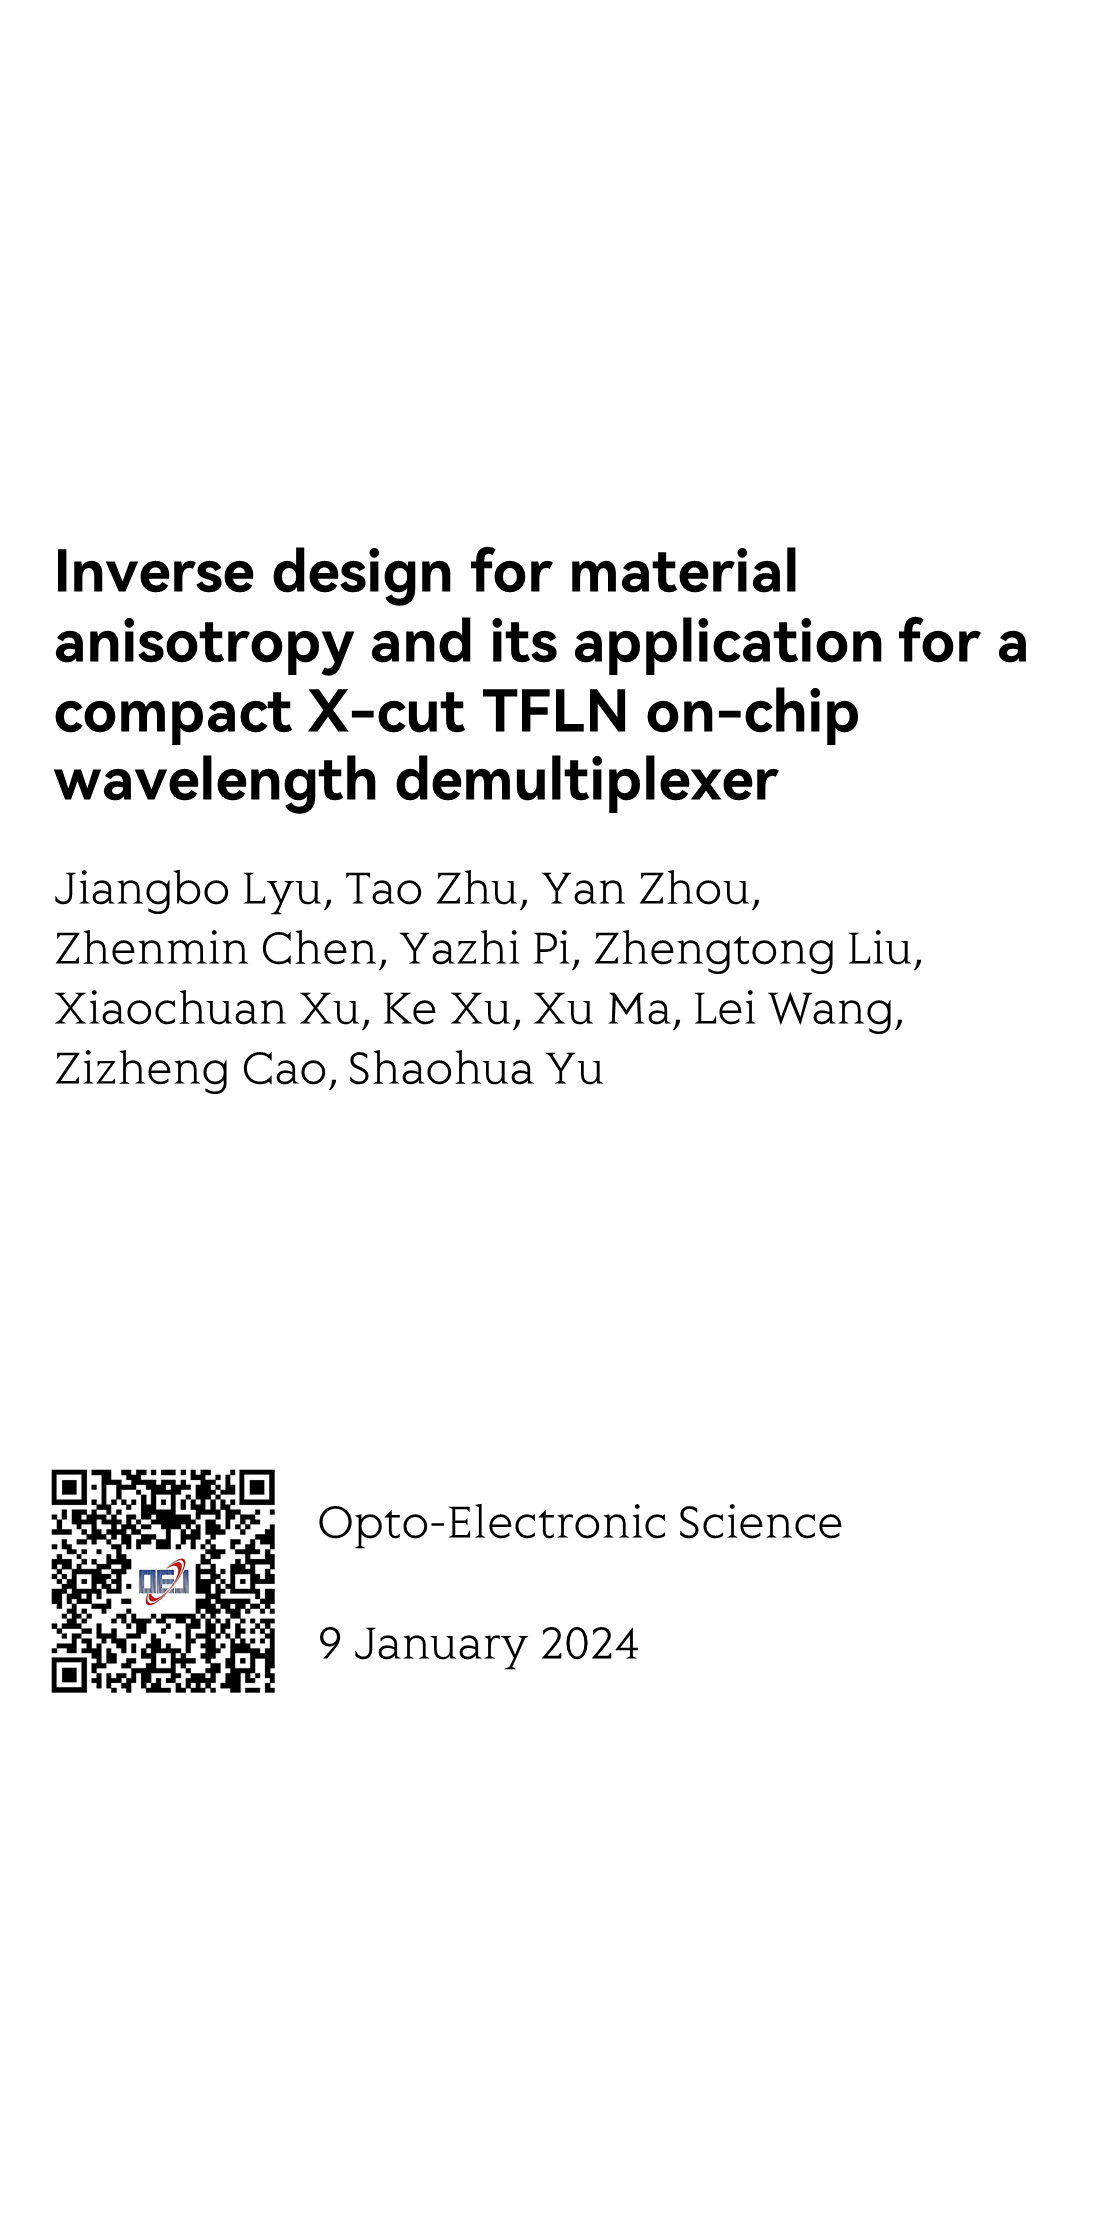 Inverse design for material anisotropy and its application for a compact X-cut TFLN on-chip wavelength demultiplexer_1